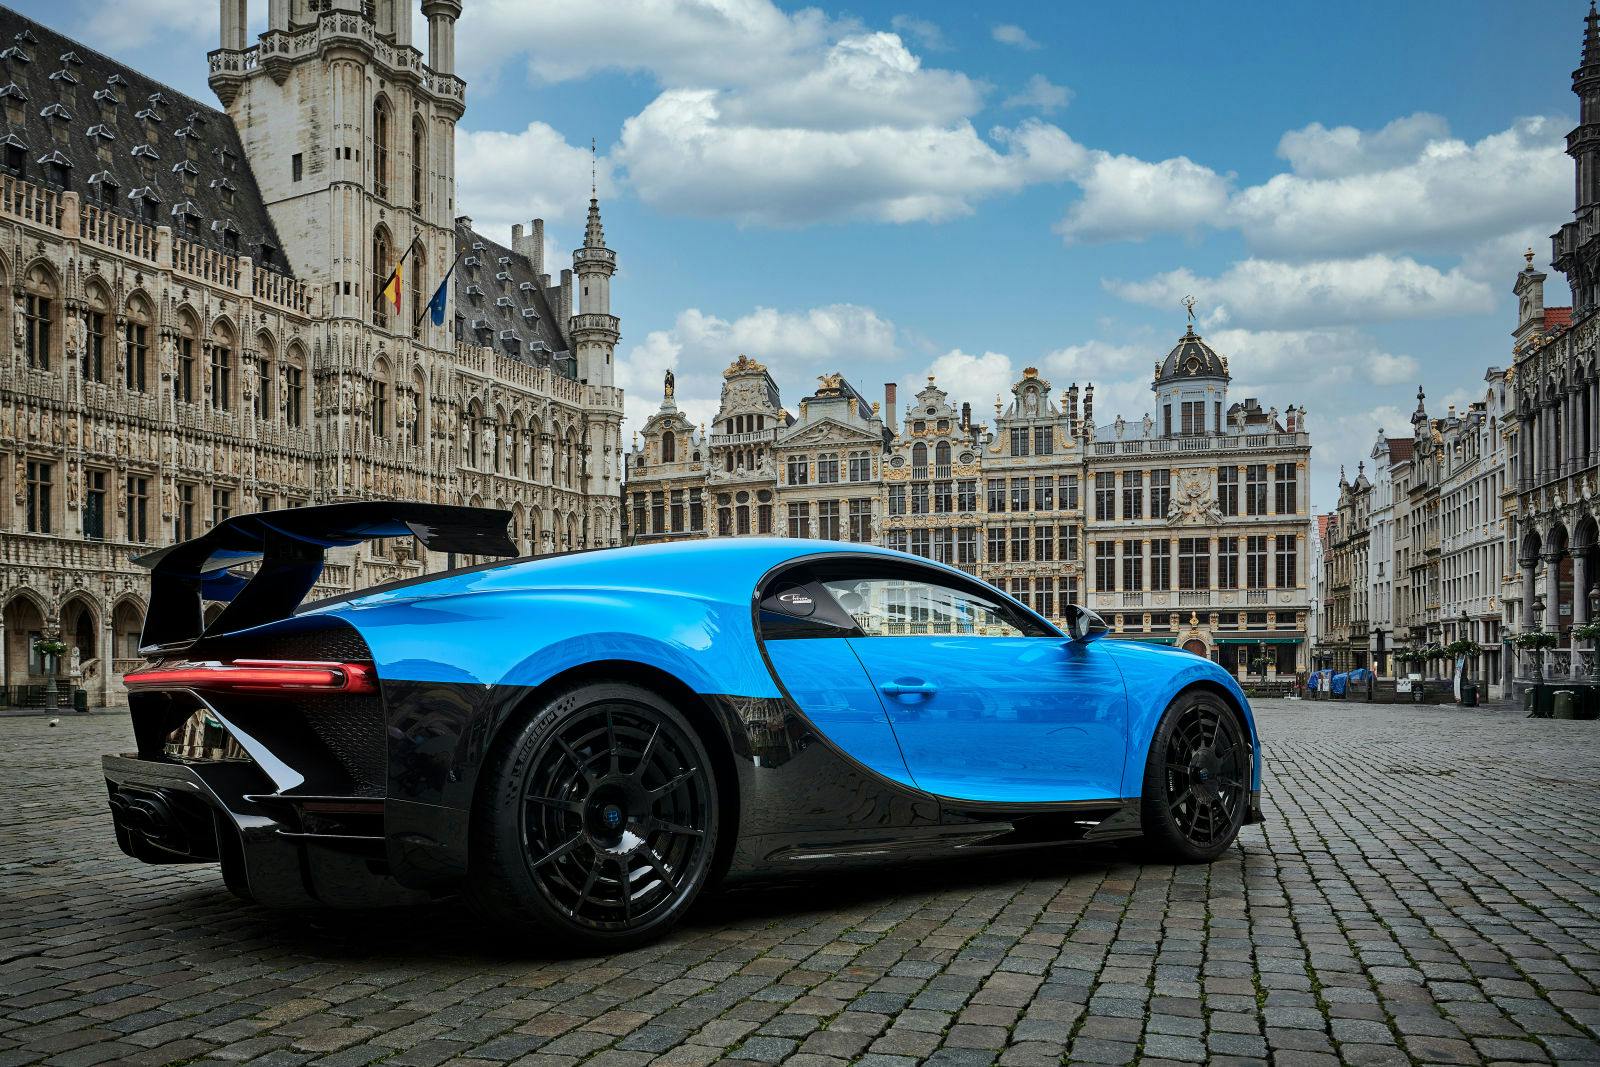 The Chiron Pur Sport at the Grand Place in Brussels.